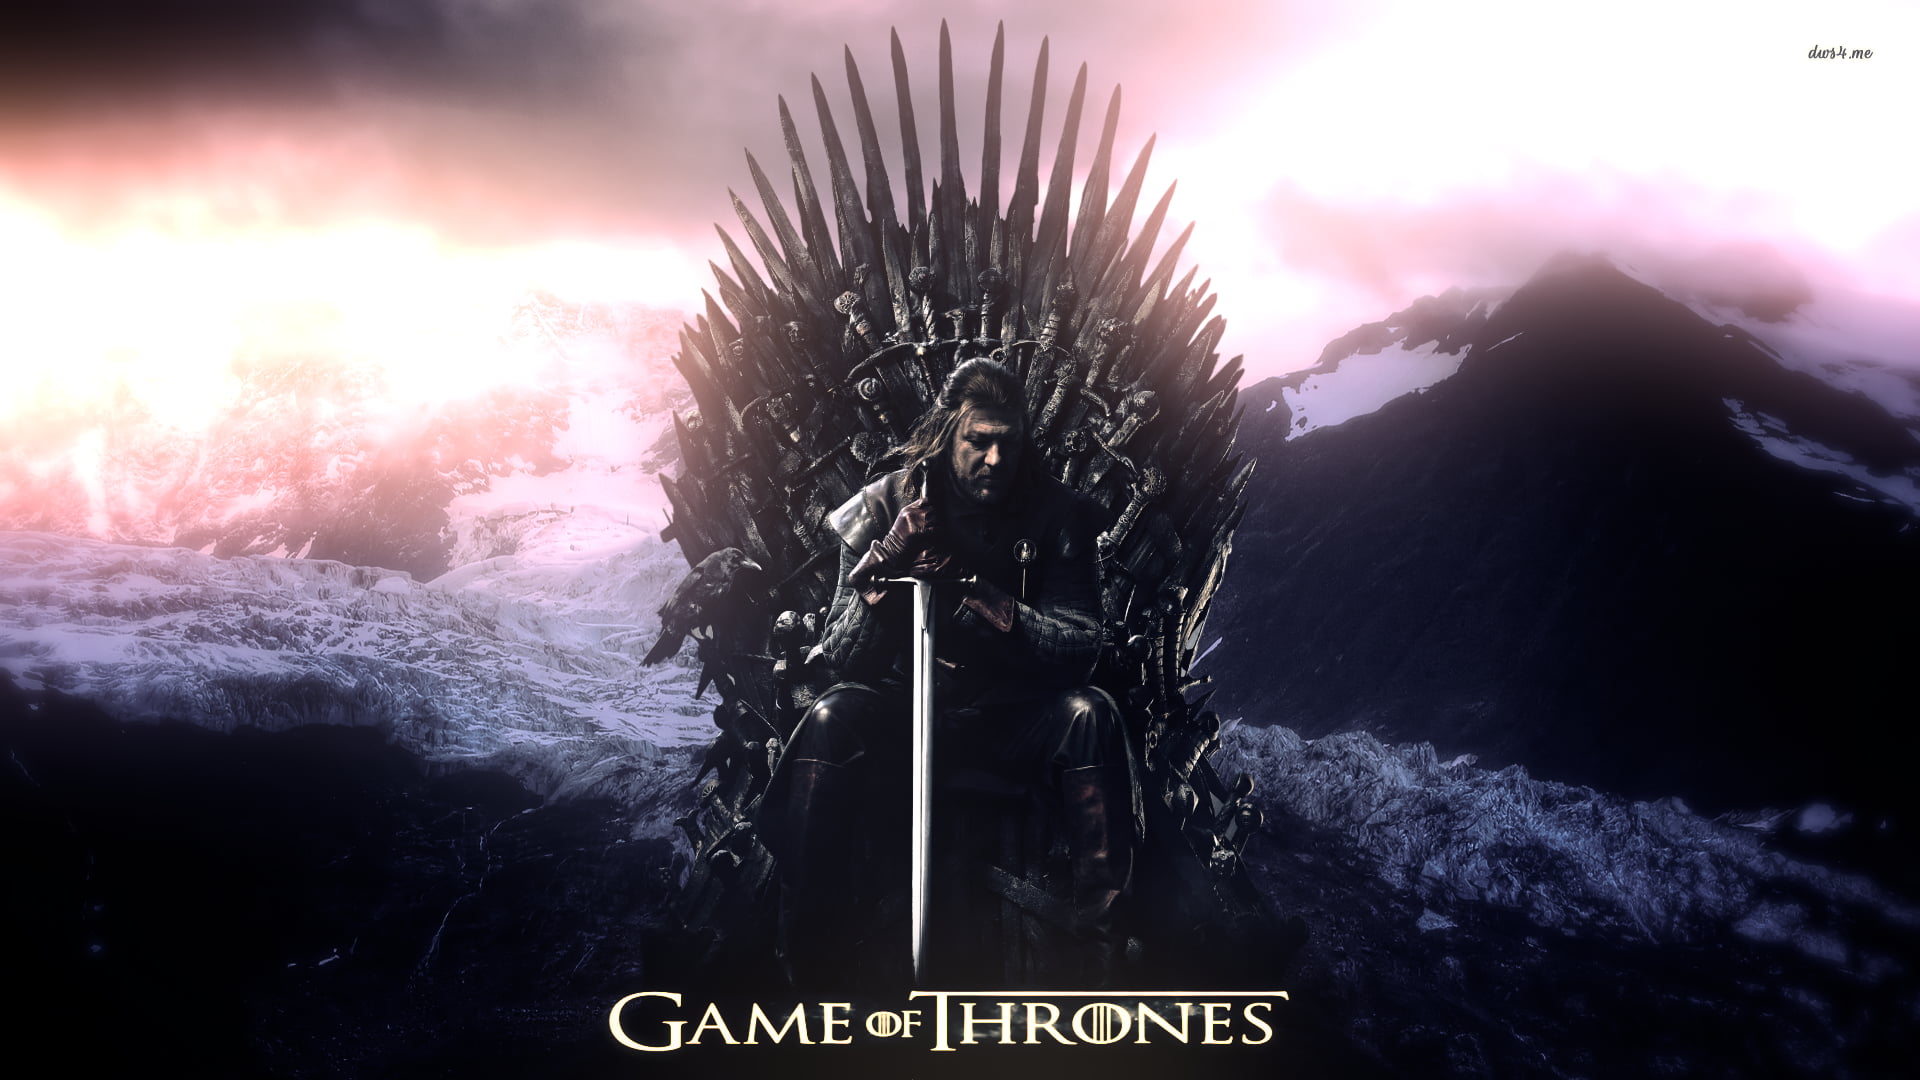 Game of Thrones cover, Ned Stark, House Stark, Game of Thrones, Iron Throne